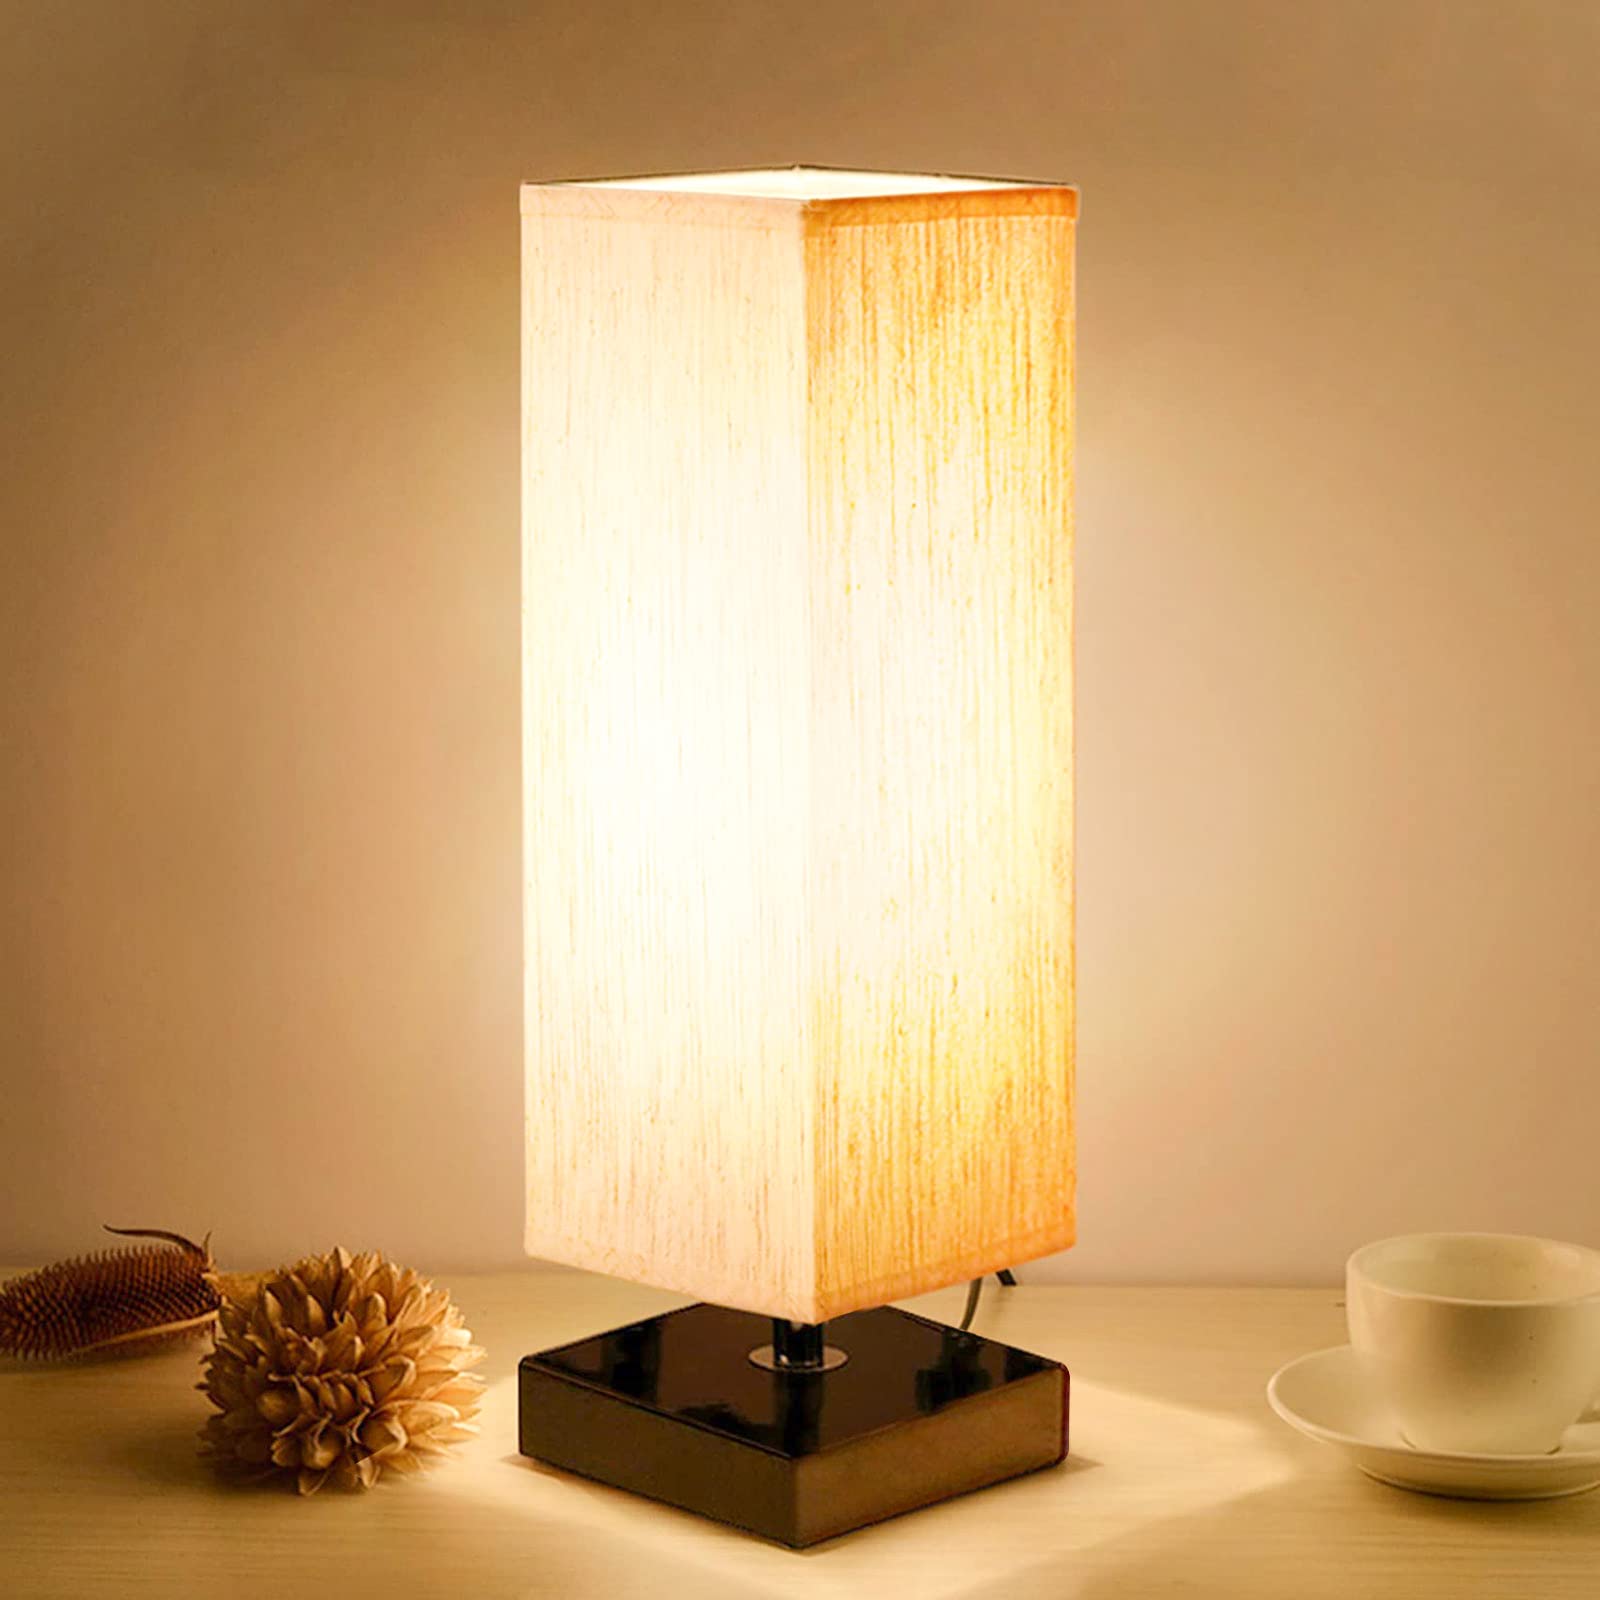 Aooshine Small Table Lamp for Bedroom - Bedside Lamps for Nightstand, Minimalist Solid Wood Night Stand Light Lamp with Square Fabric Sha